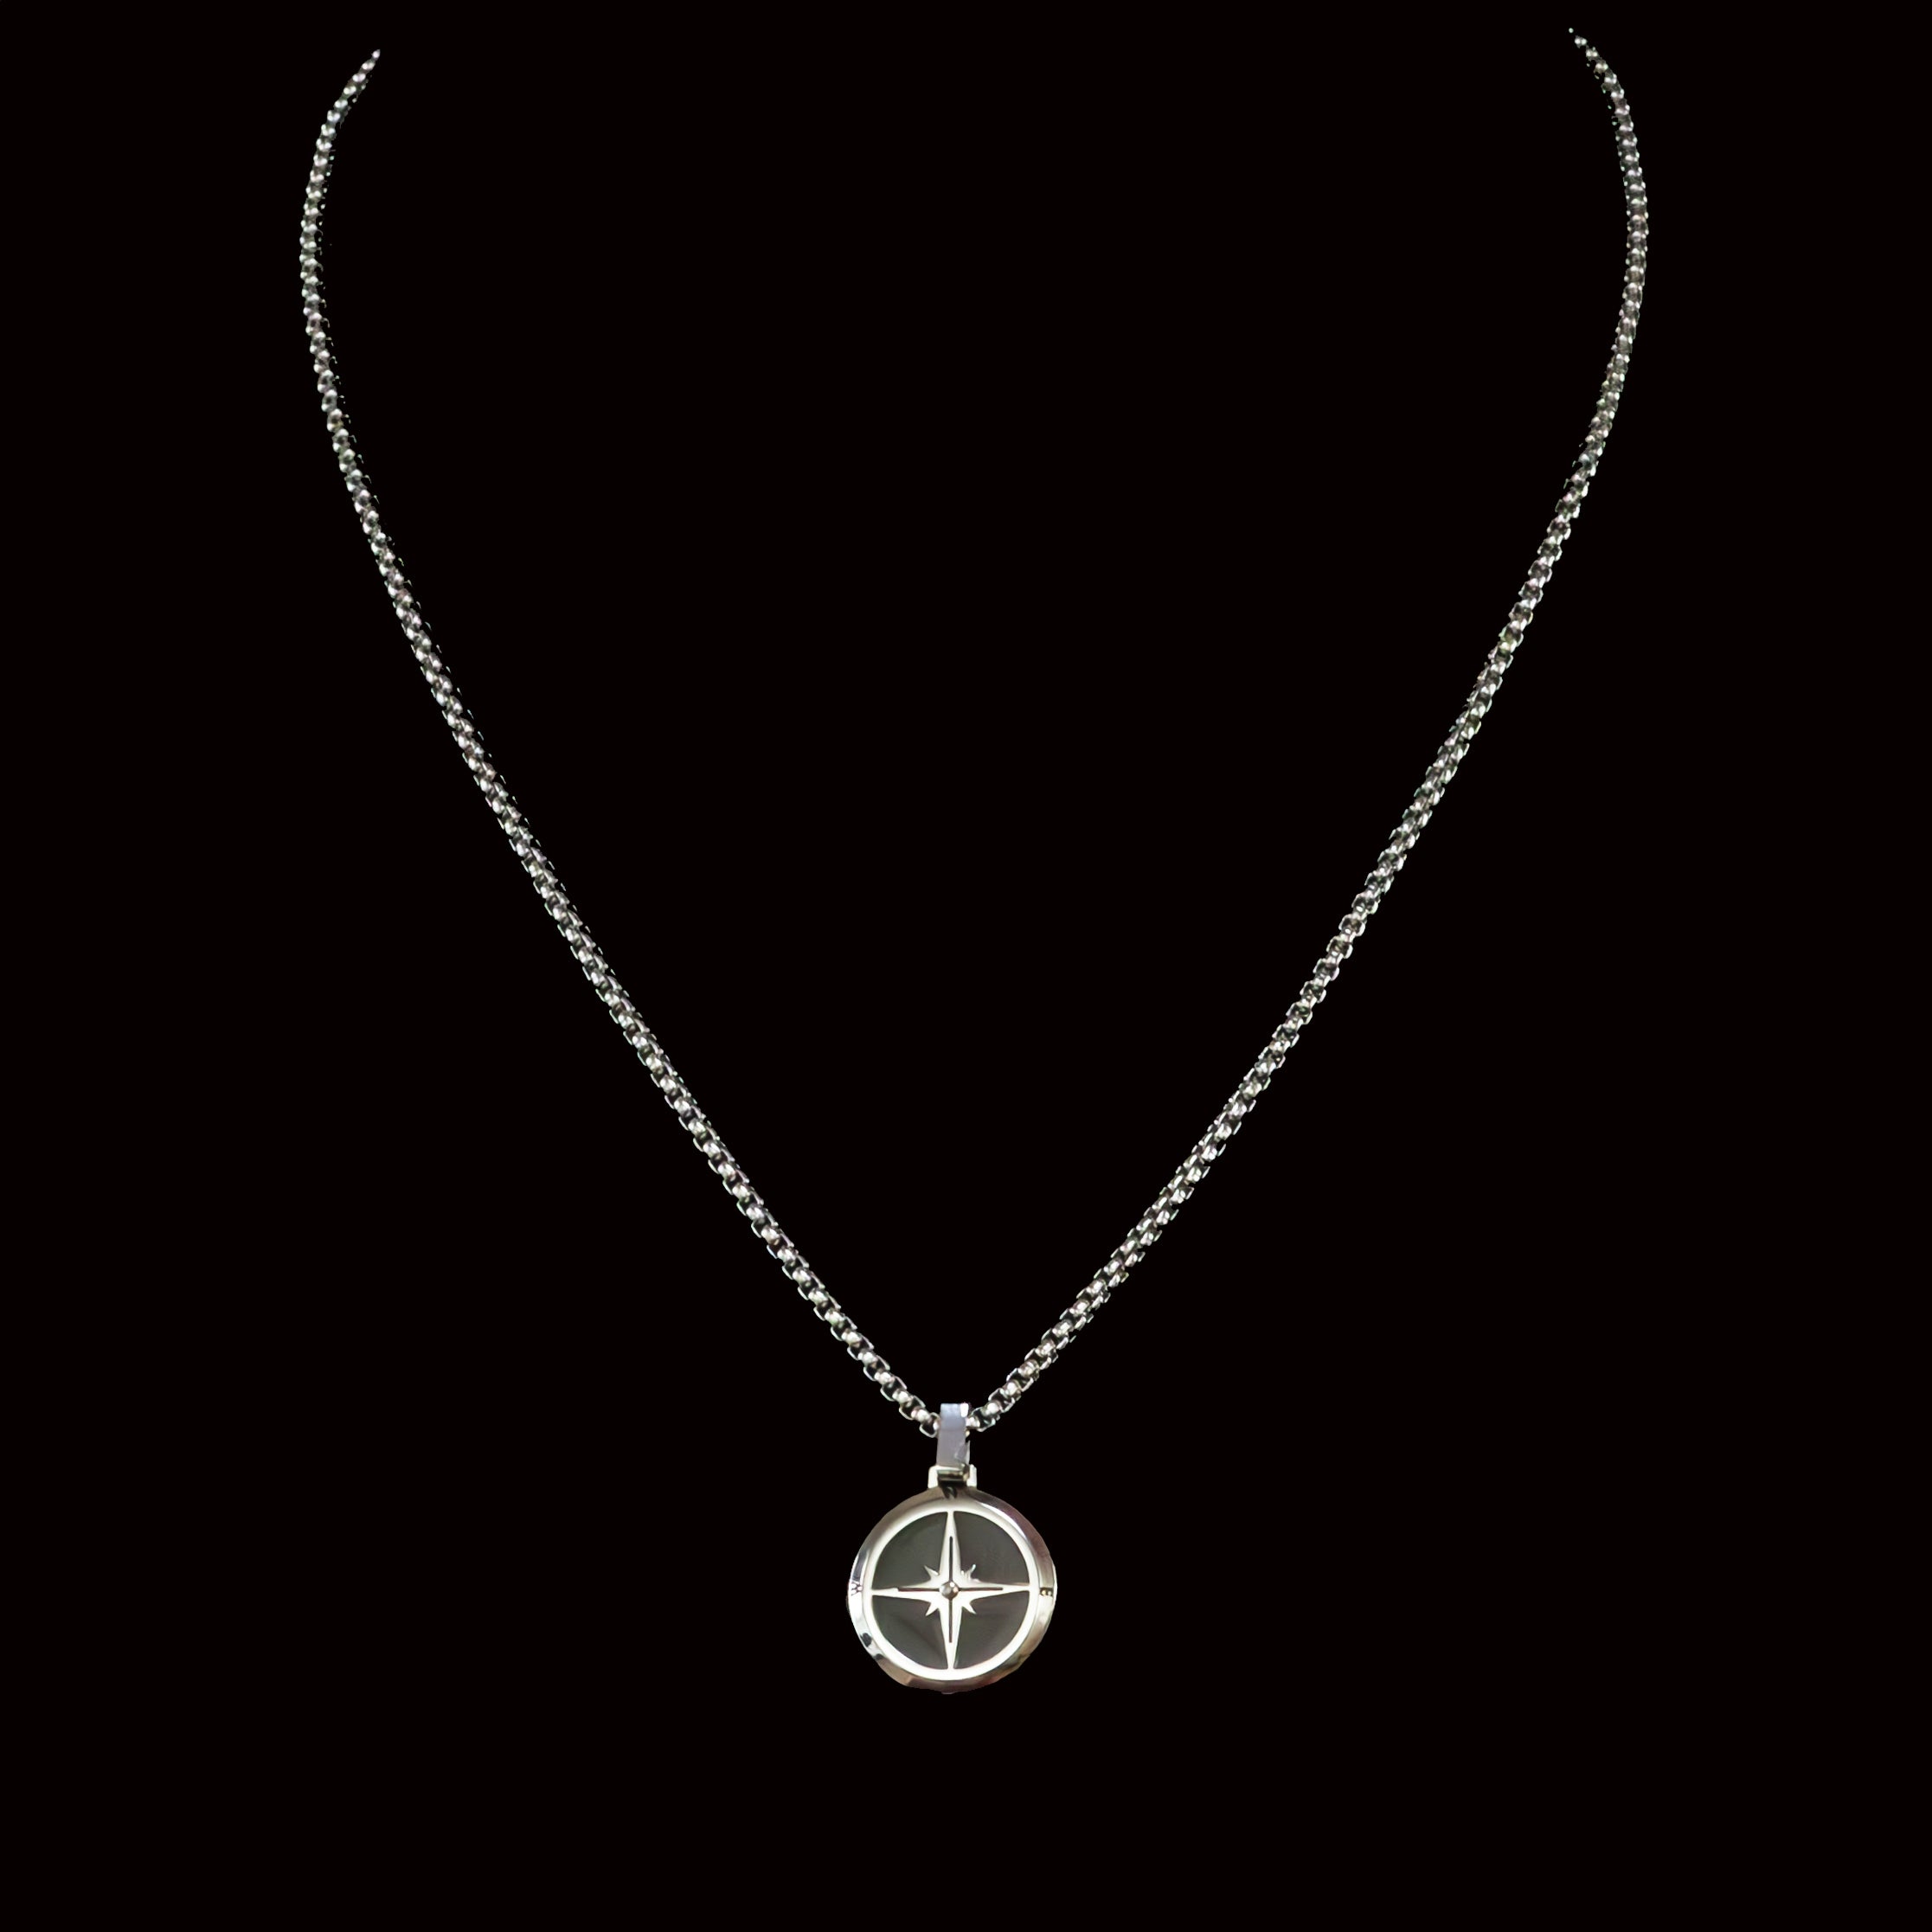 Cleanto Stainless Steel Chain Necklace with Compass Pendant